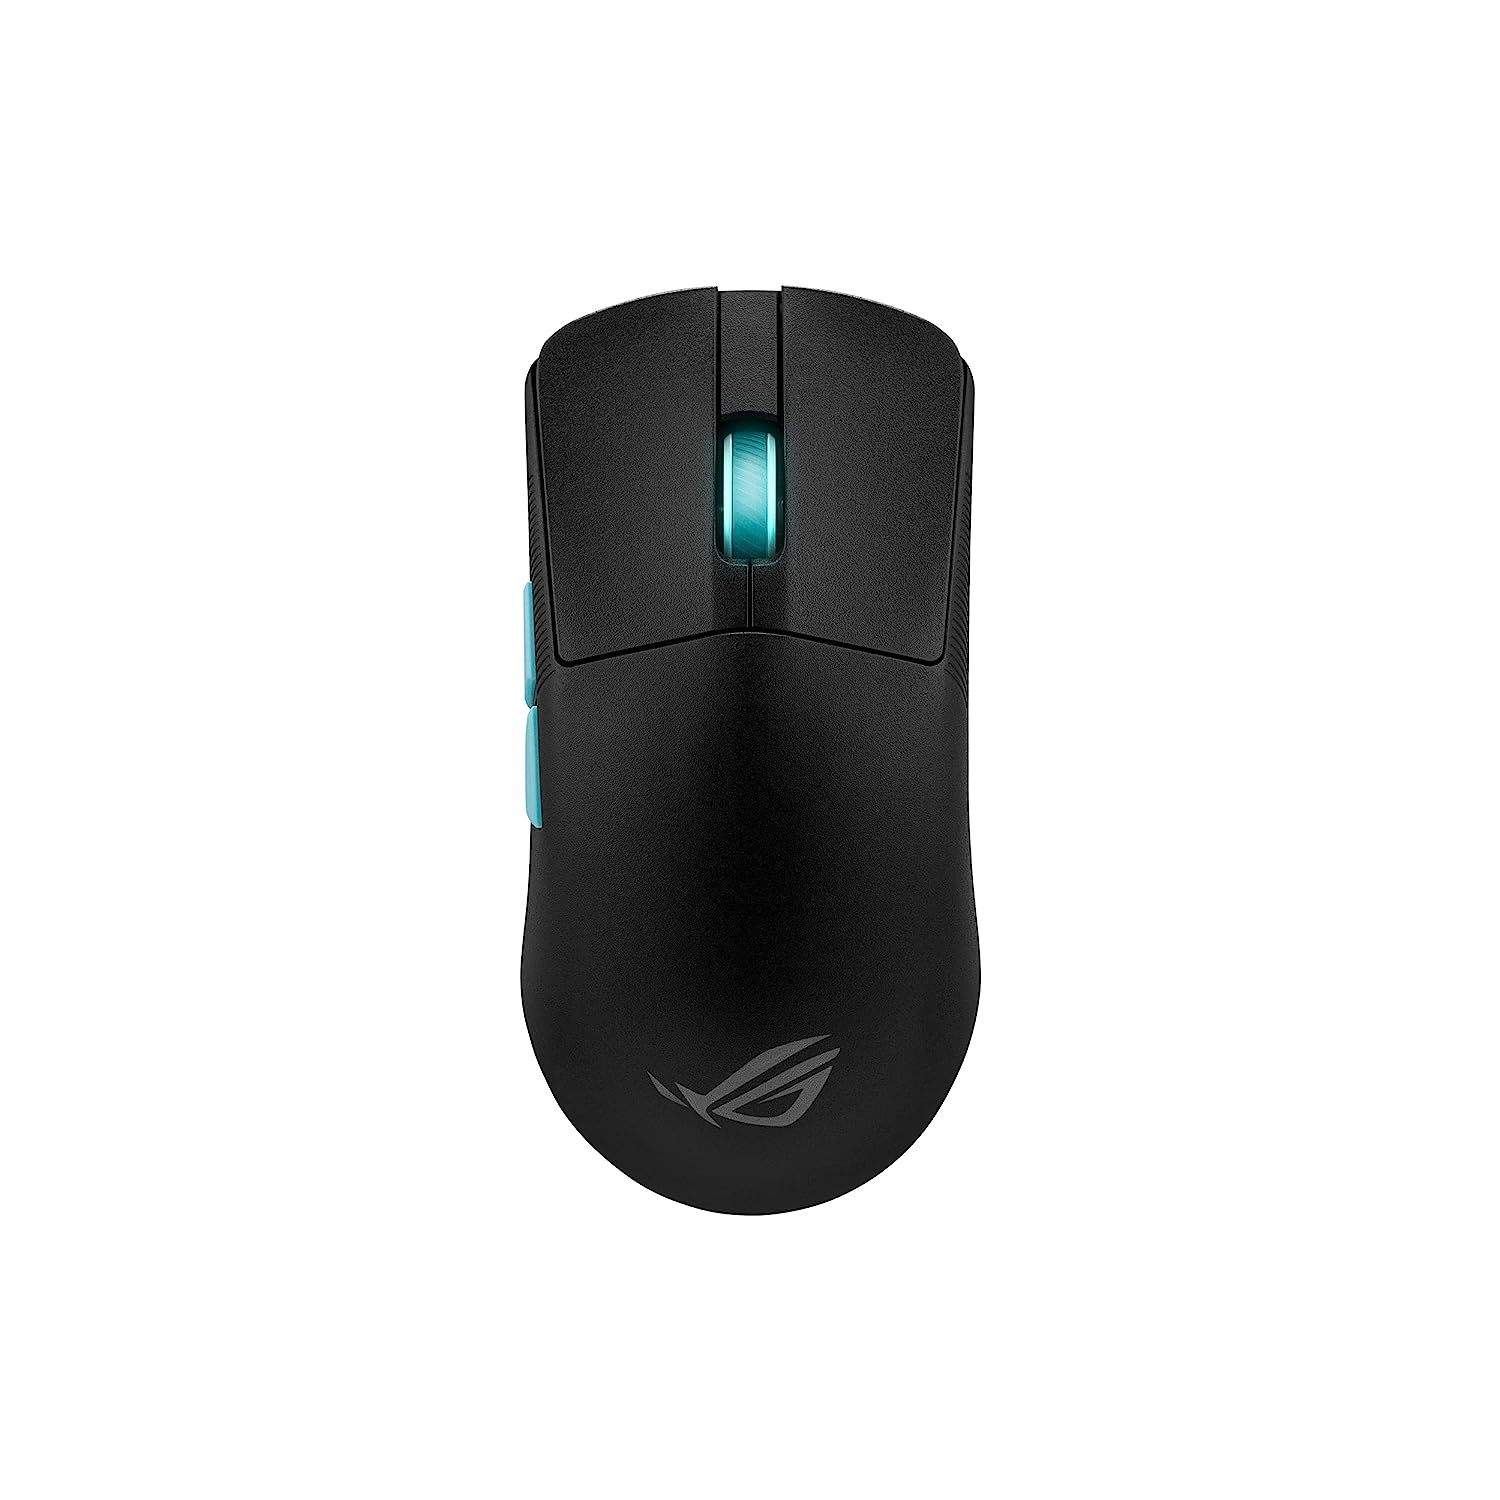 ASUS ROG Harpe Ace Aim Lab Edition Gaming Mouse, 54 g Ultra-Lightwieght, Connect - $169.99